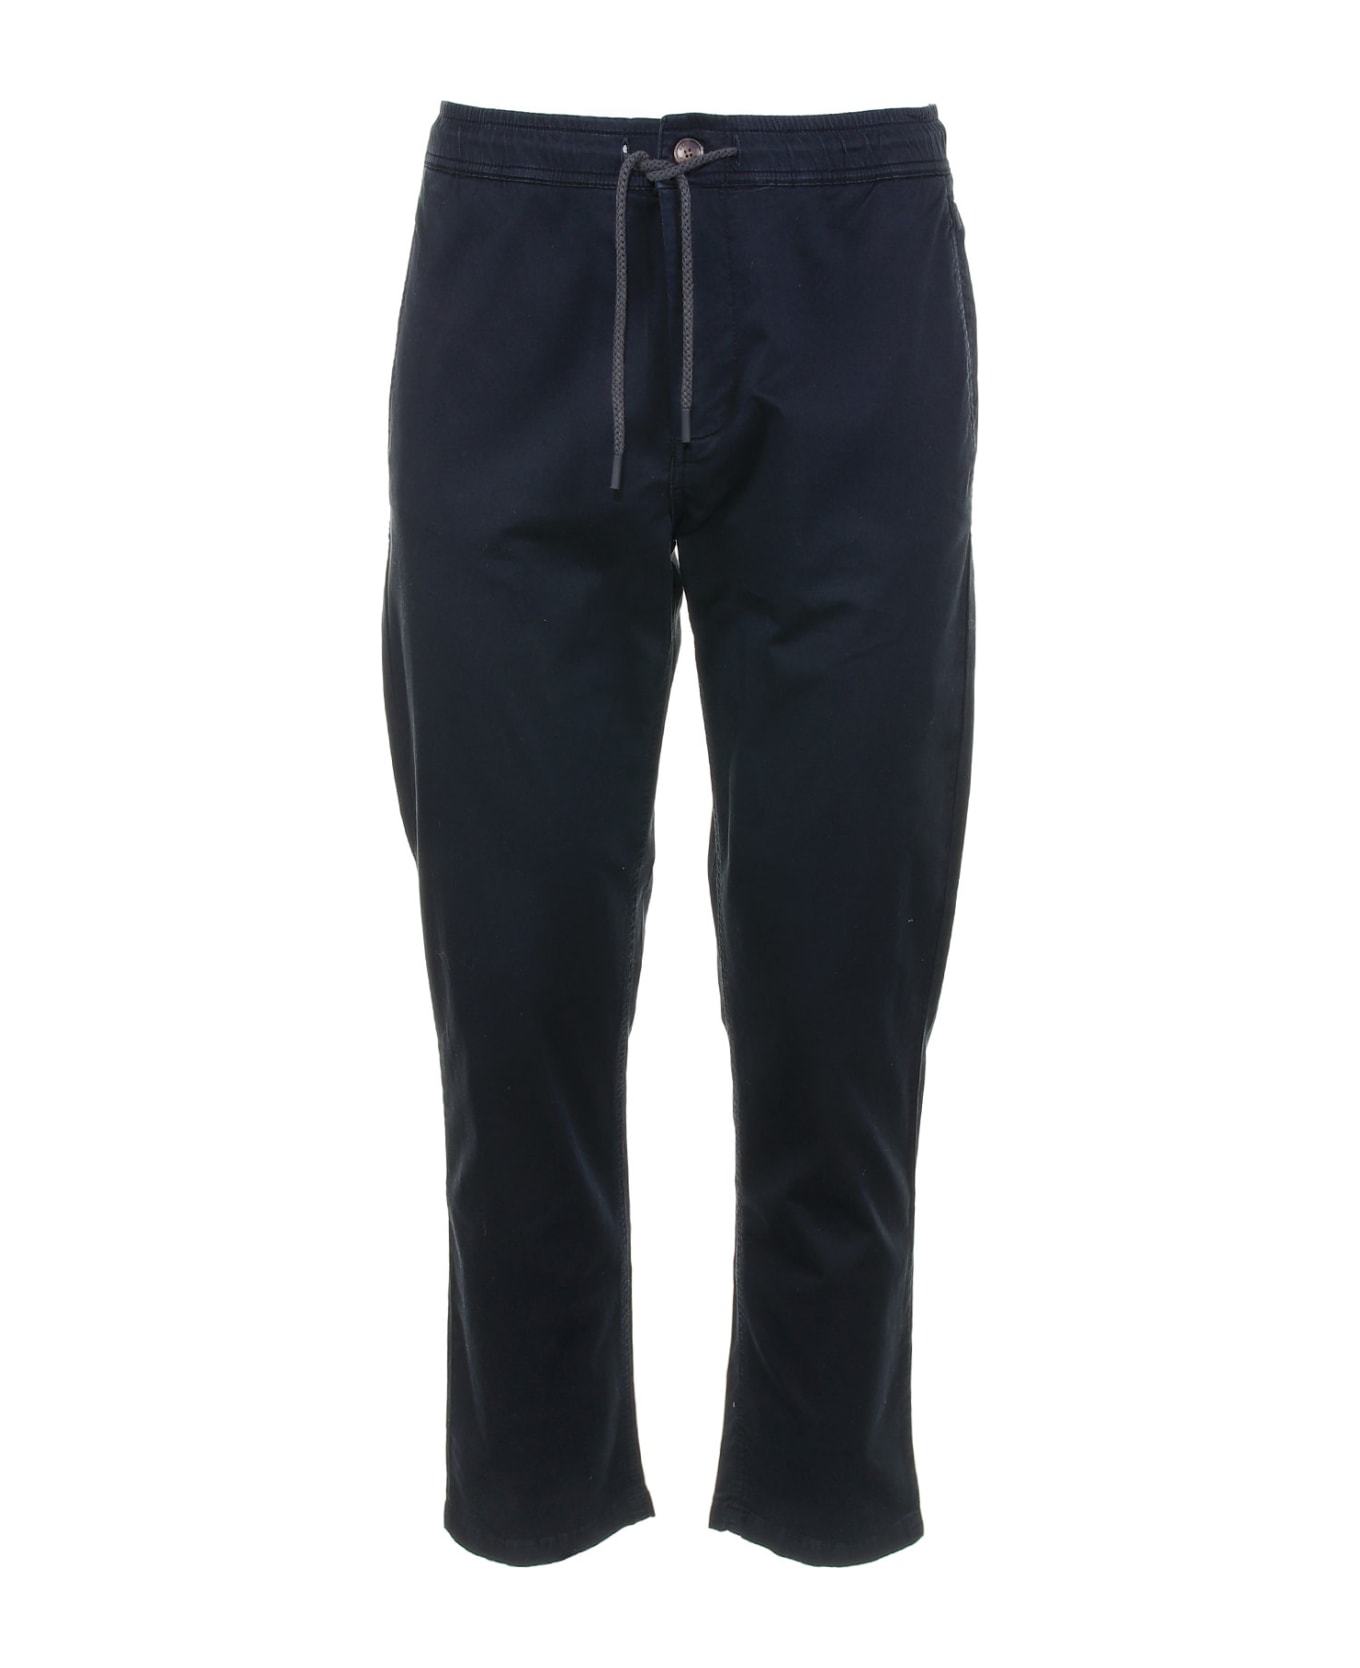 Ecoalf Trousers pants With Drawstring At The Waist - NAVY